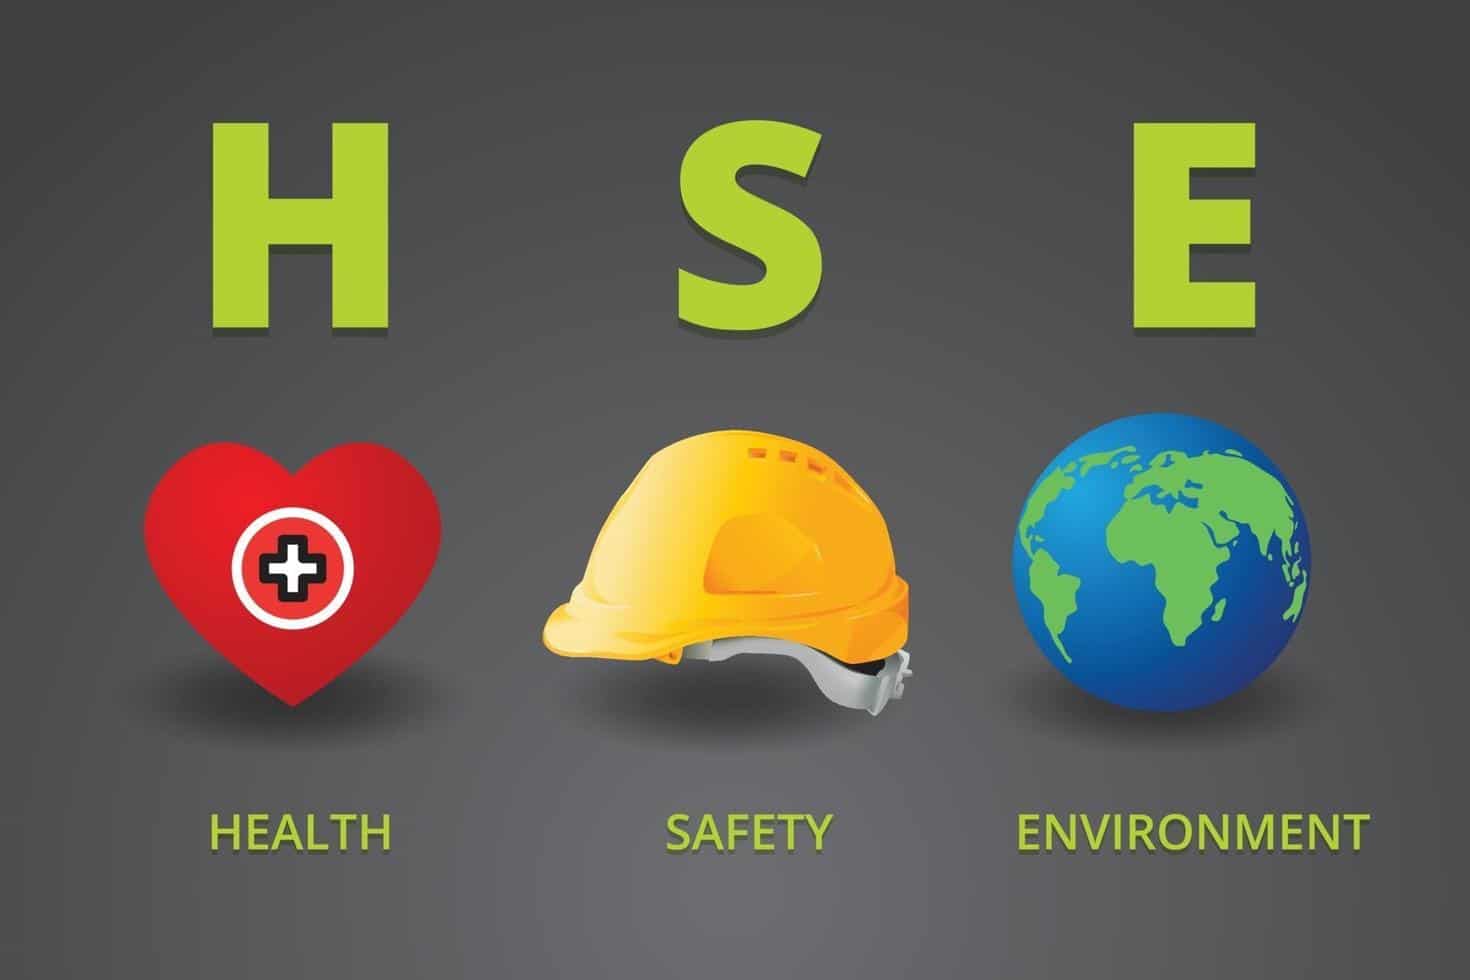 Skyward HSE: A Comprehensive Health, Safety, and Environmental Management System